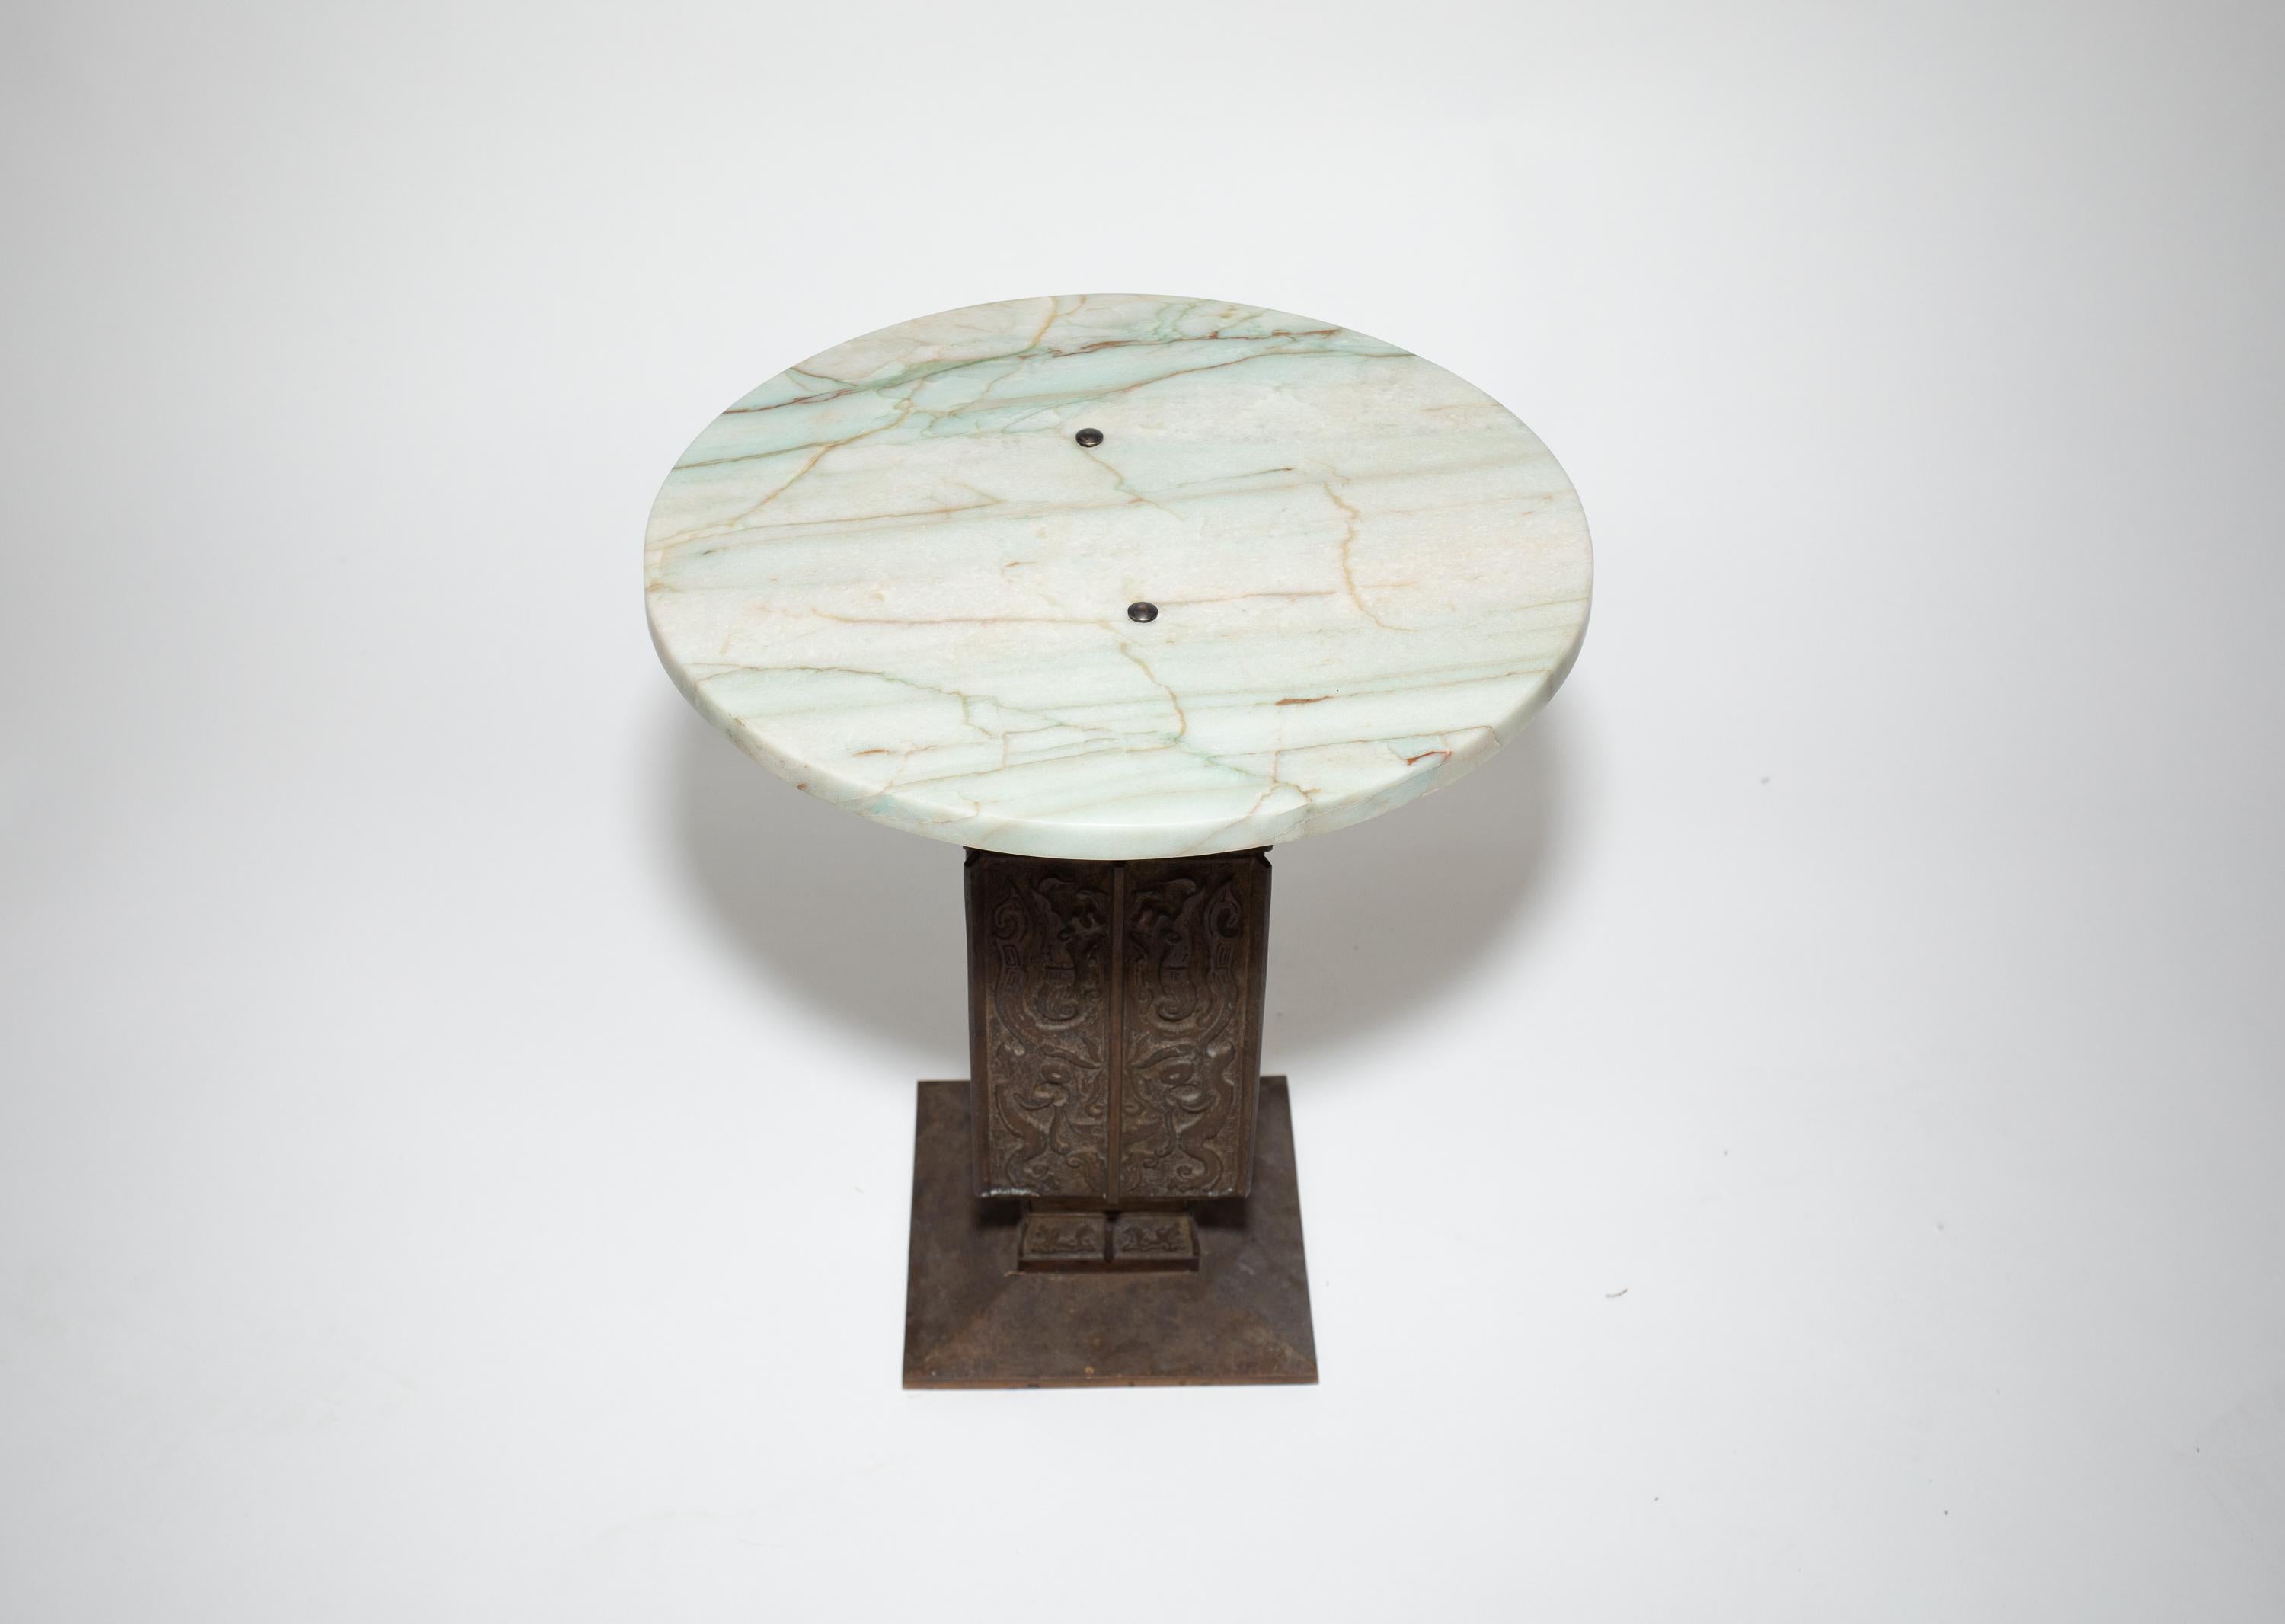 Heavy Bronze and Marble diminutive tables
Bases sculpted with modern chinoiserie decoration